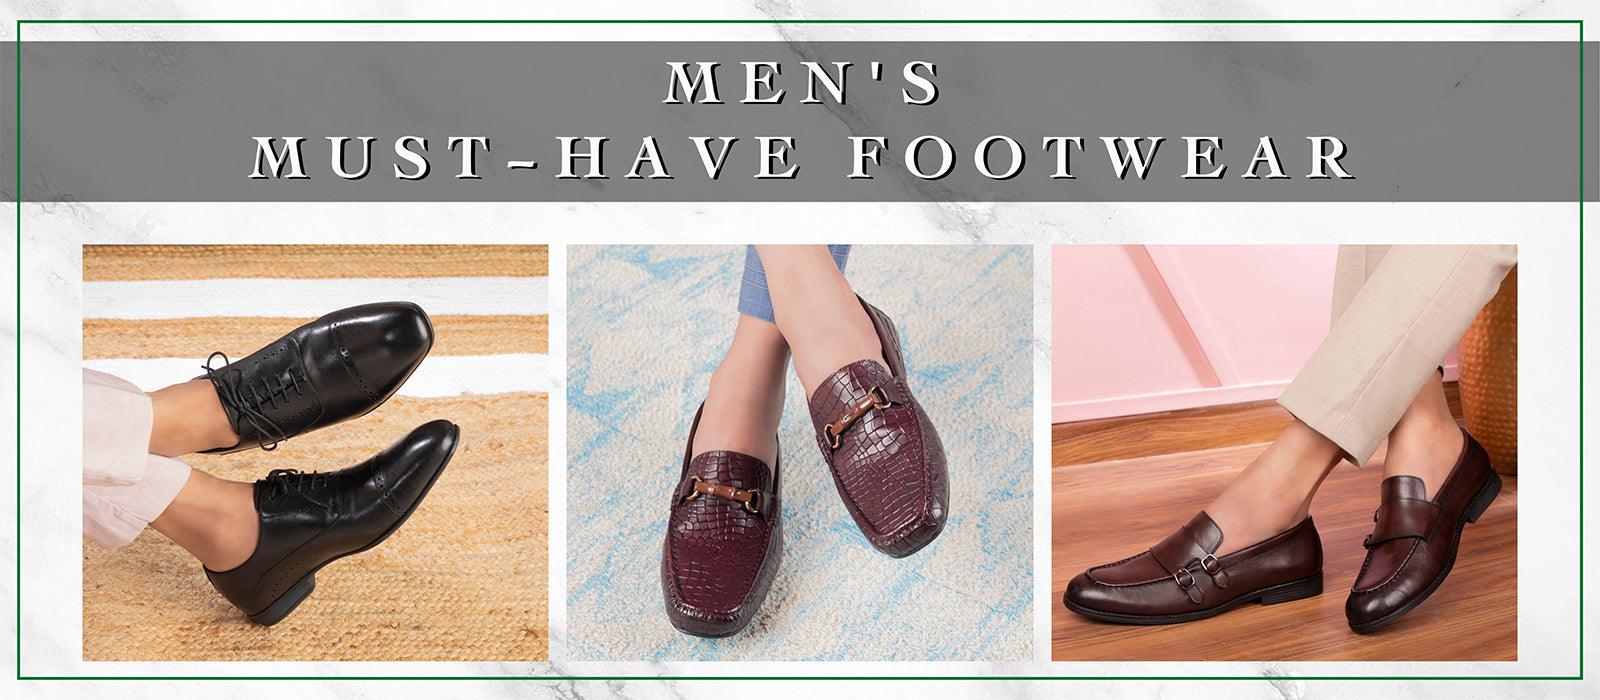 Top 5 Shoes Every Guy Needs To Have - Tresmode